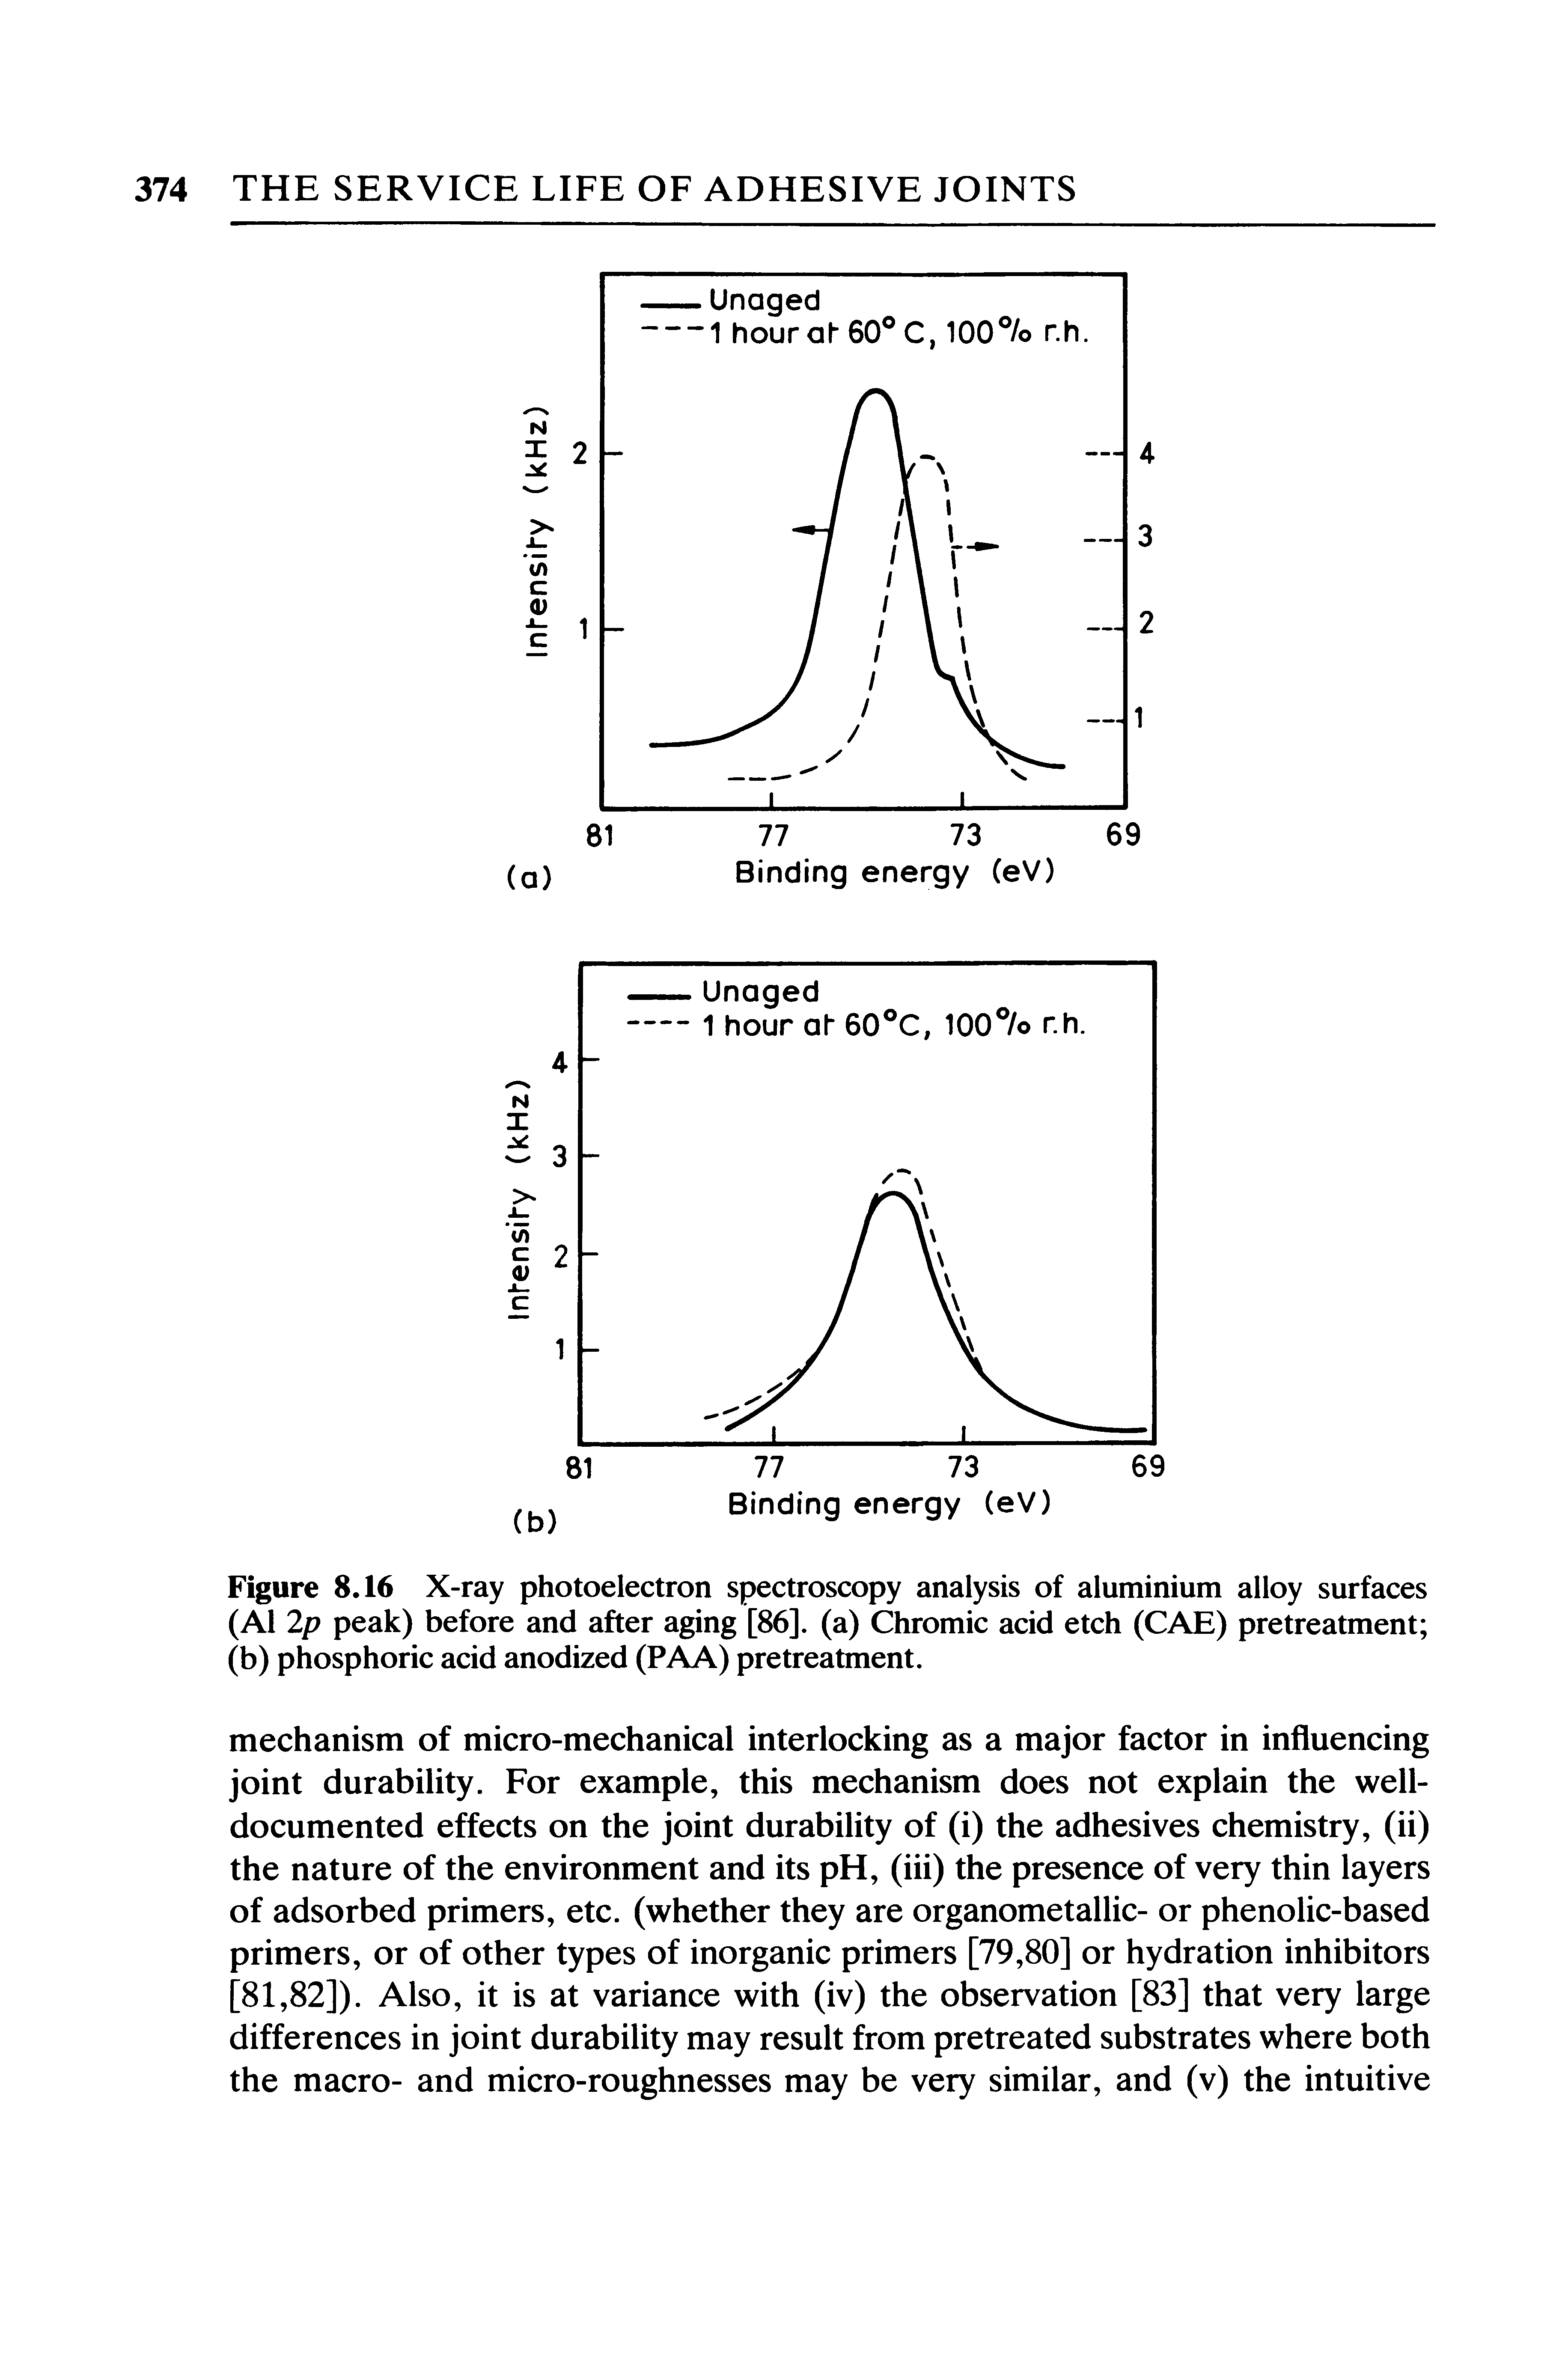 Figure 8.16 X-ray photoelectron spectroscopy analysis of aluminium alloy surfaces (A1 2/7 peak) before and after aging [86]. (a) Chromic acid etch (CAE) pretreatment (b) phosphoric acid anodized (PAA) pretreatment.